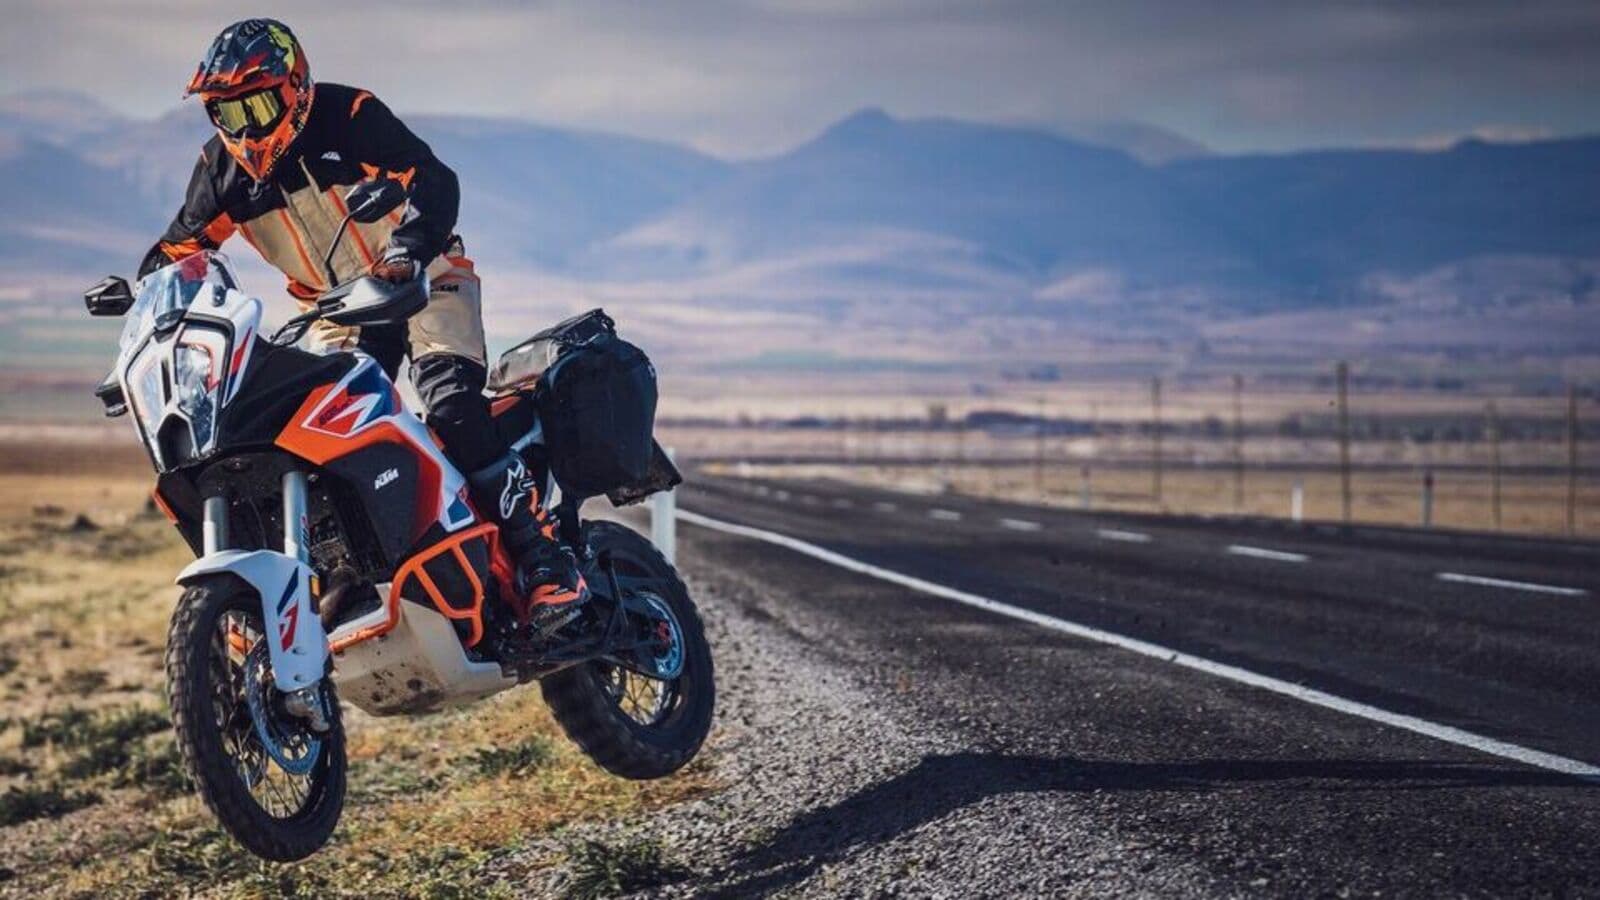 2023 KTM 1290 Super Adventure R unveiled globally: Will it come to India?